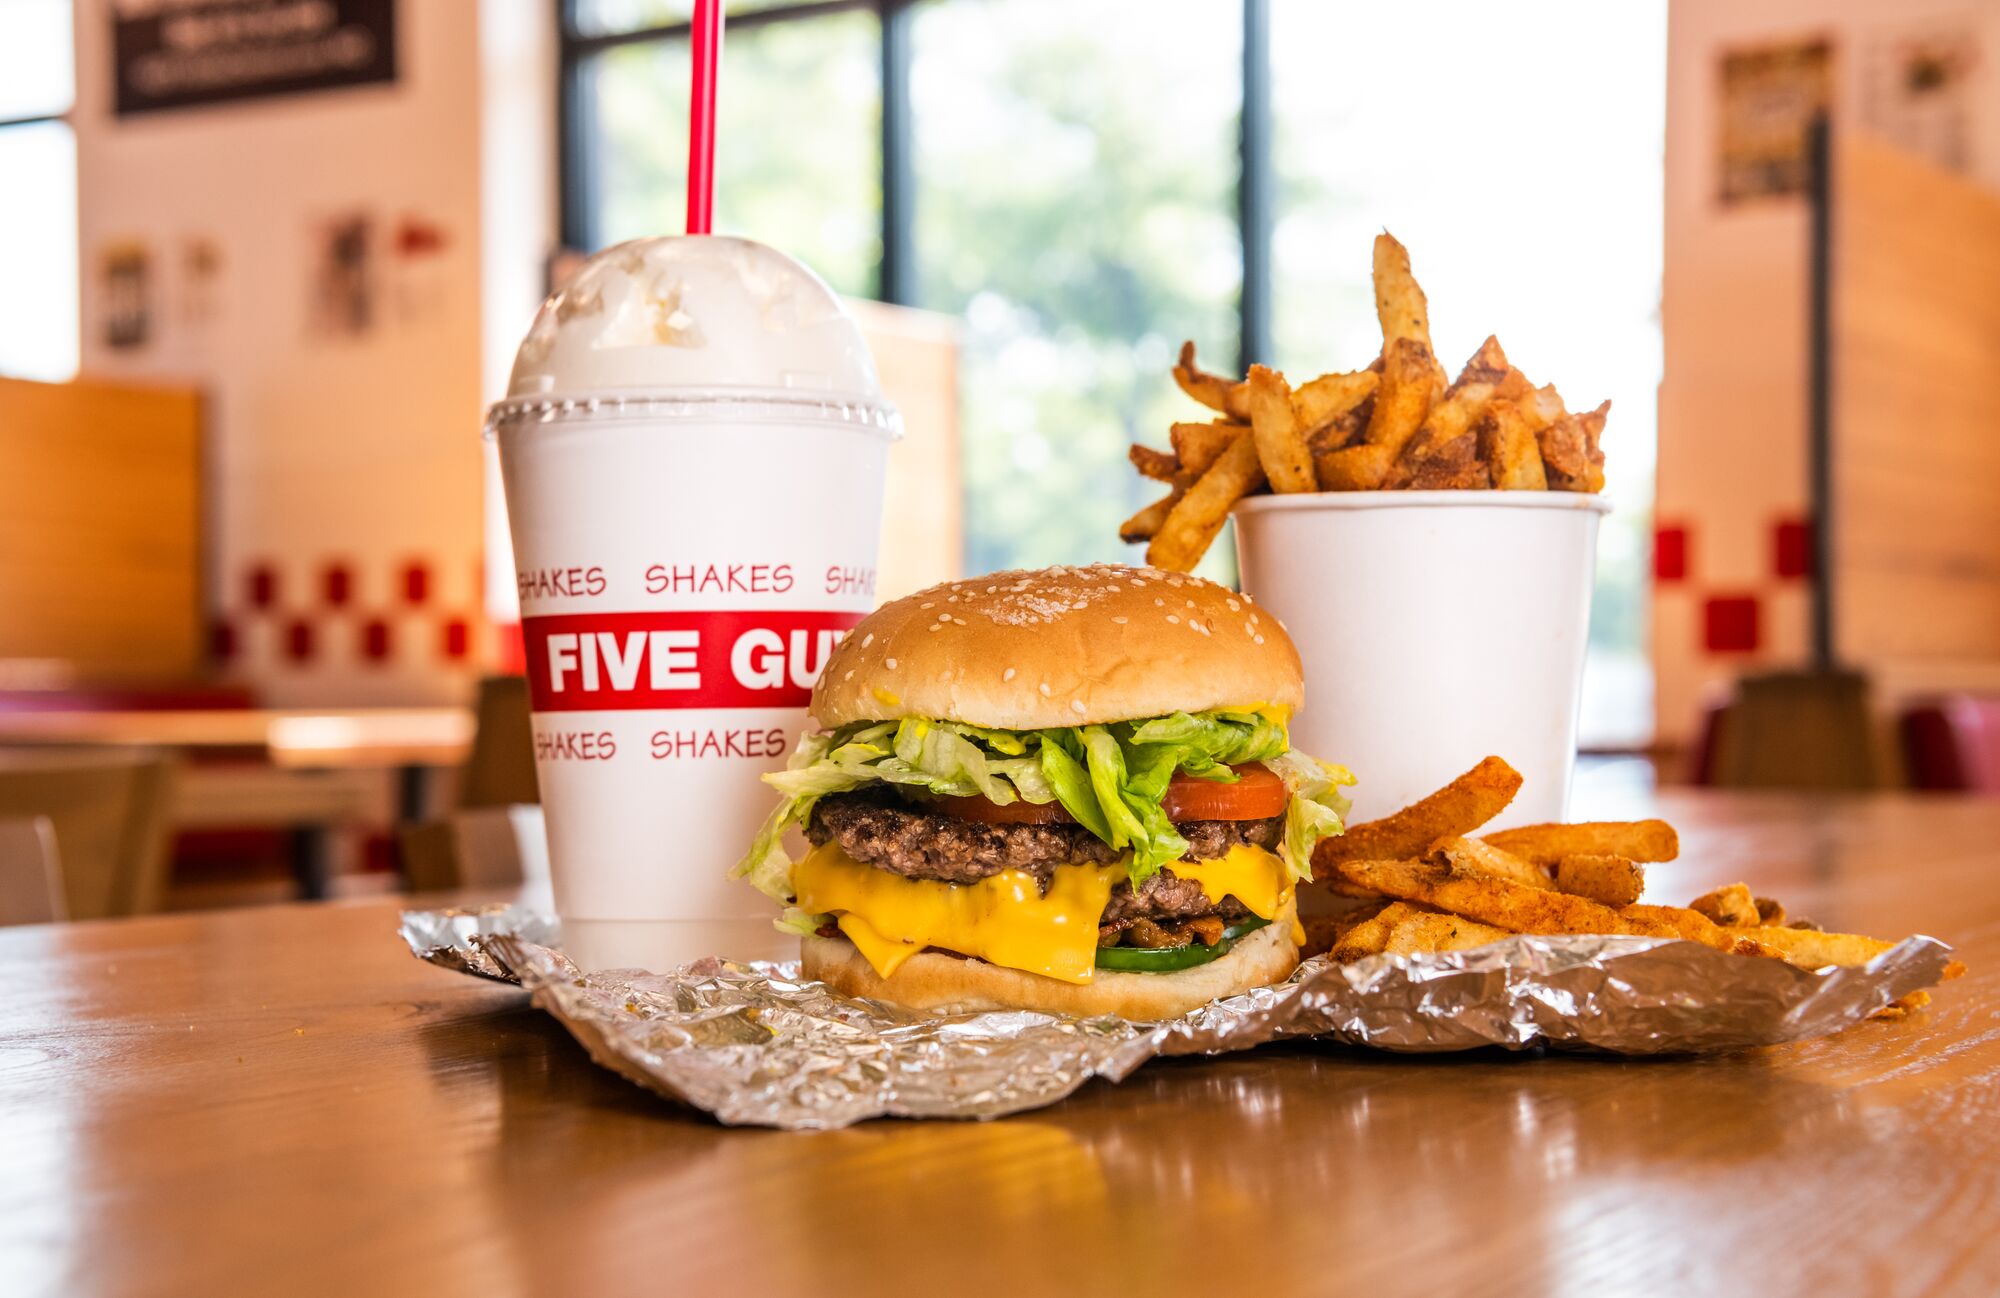 A Five Guys cheeseburger, milkshake and regular order of fries sits on a table inside a Five Guys re Five Guys Thousand Oaks (805)496-0173